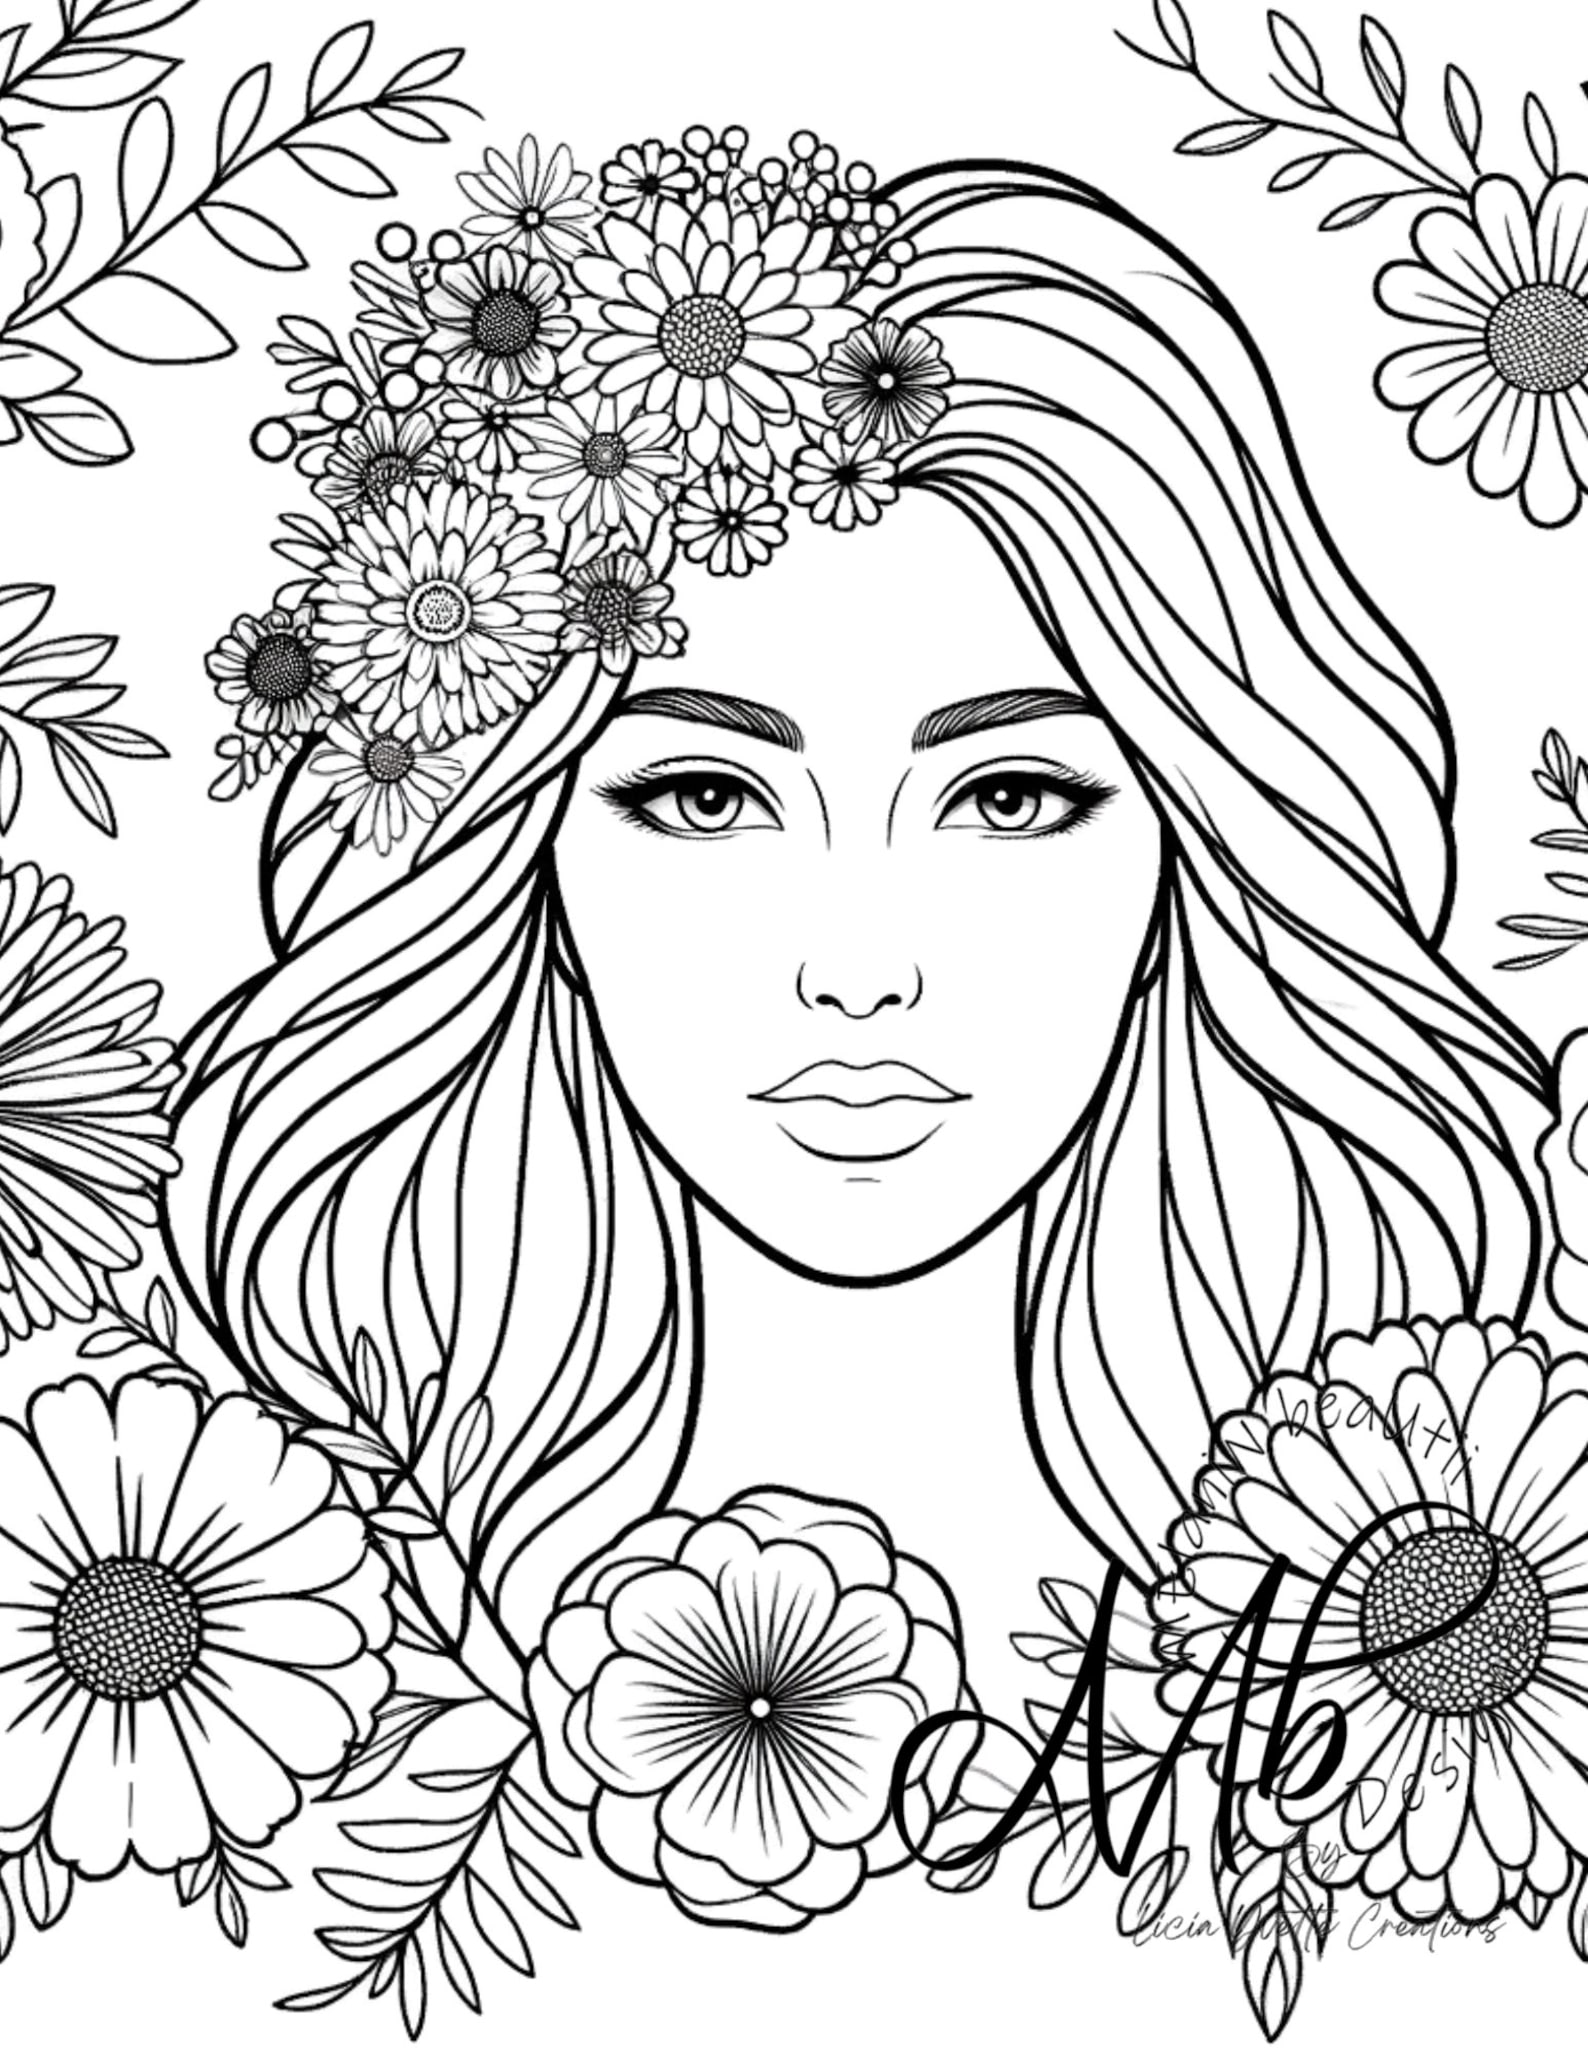 AI Digital Coloring Page African American Printable - Etsy